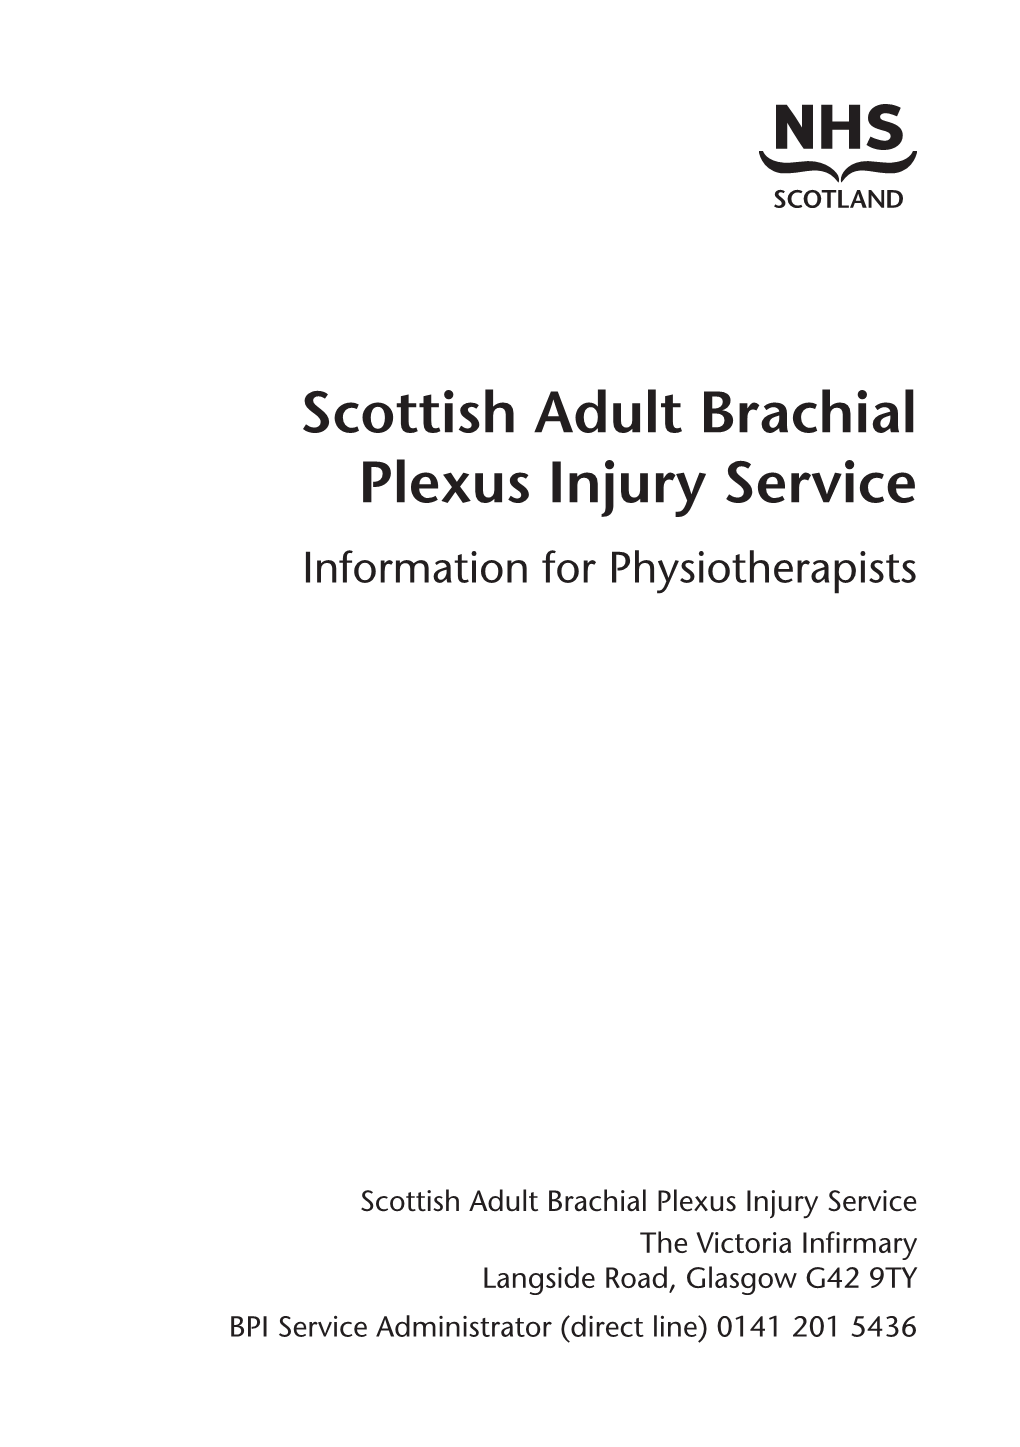 Information for Physiotherapists